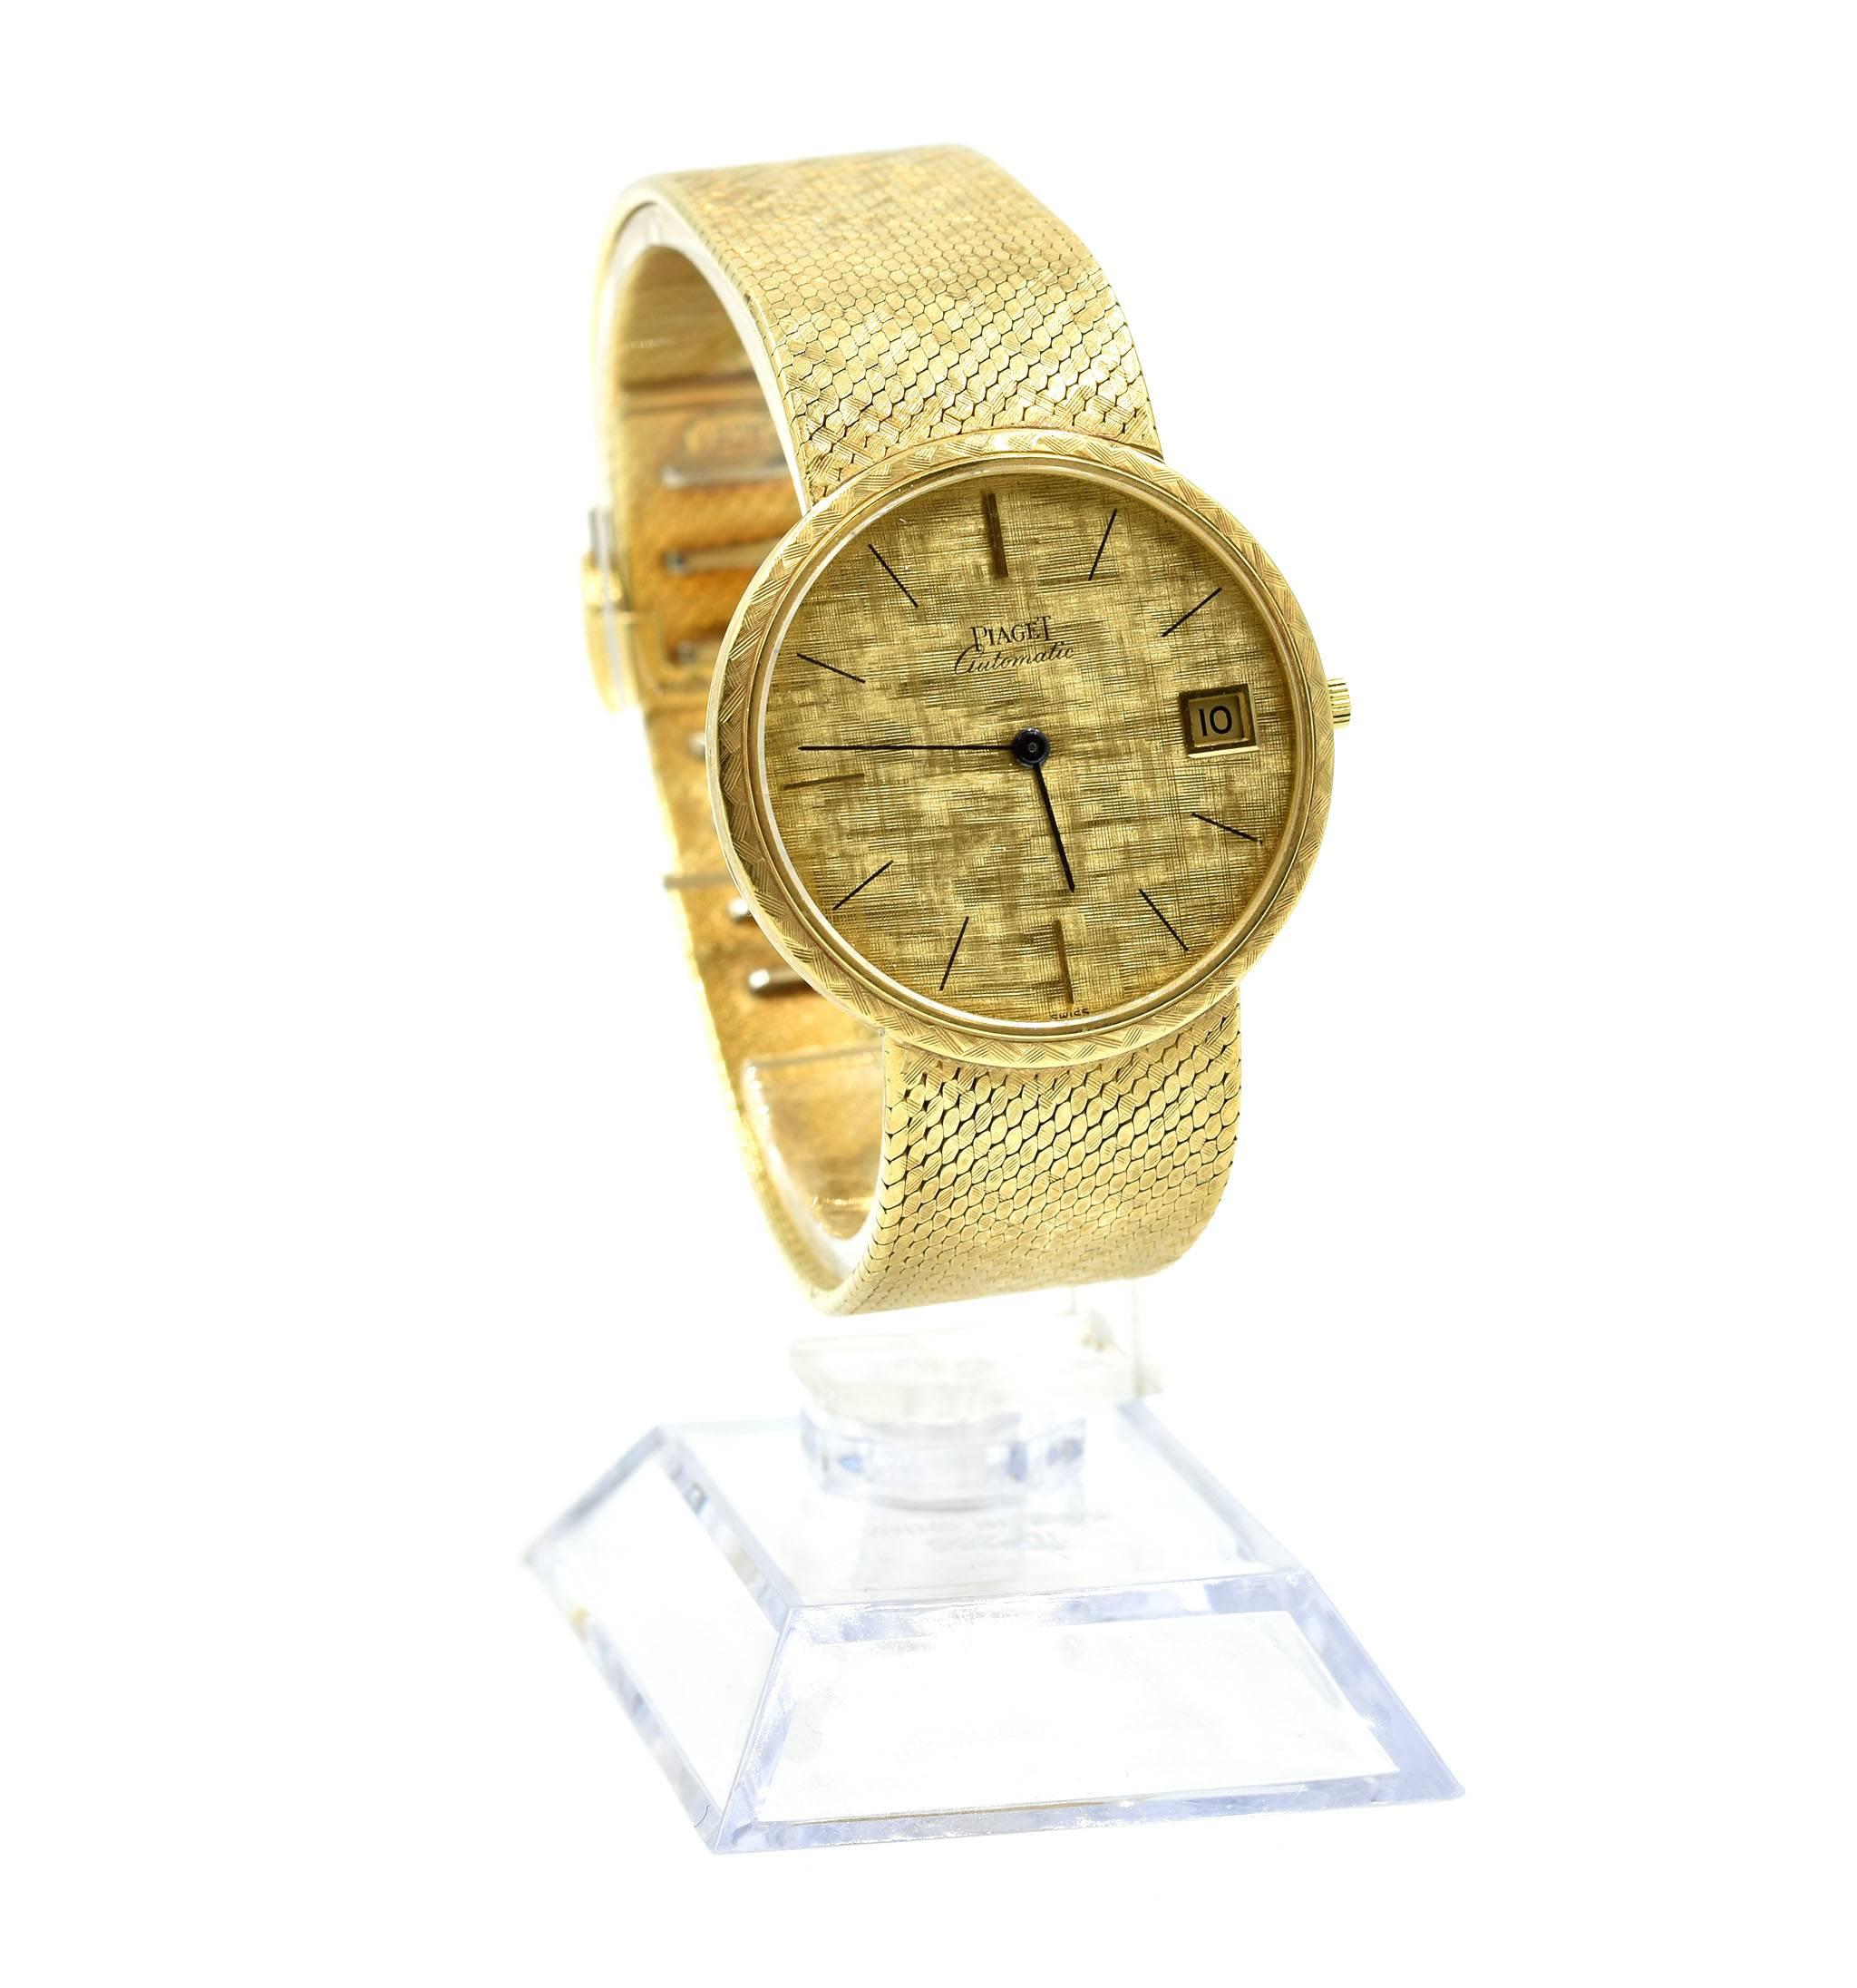 Movement: mechanical
Function: hours, minutes, date
Case: round 32mm 18k yellow gold case with fixed bezel, plastic protective crystal, winding crown
Dial: gold dial with blued steel hands, gold stick hour markers, date at 3 o’clock
Band: 18k yellow